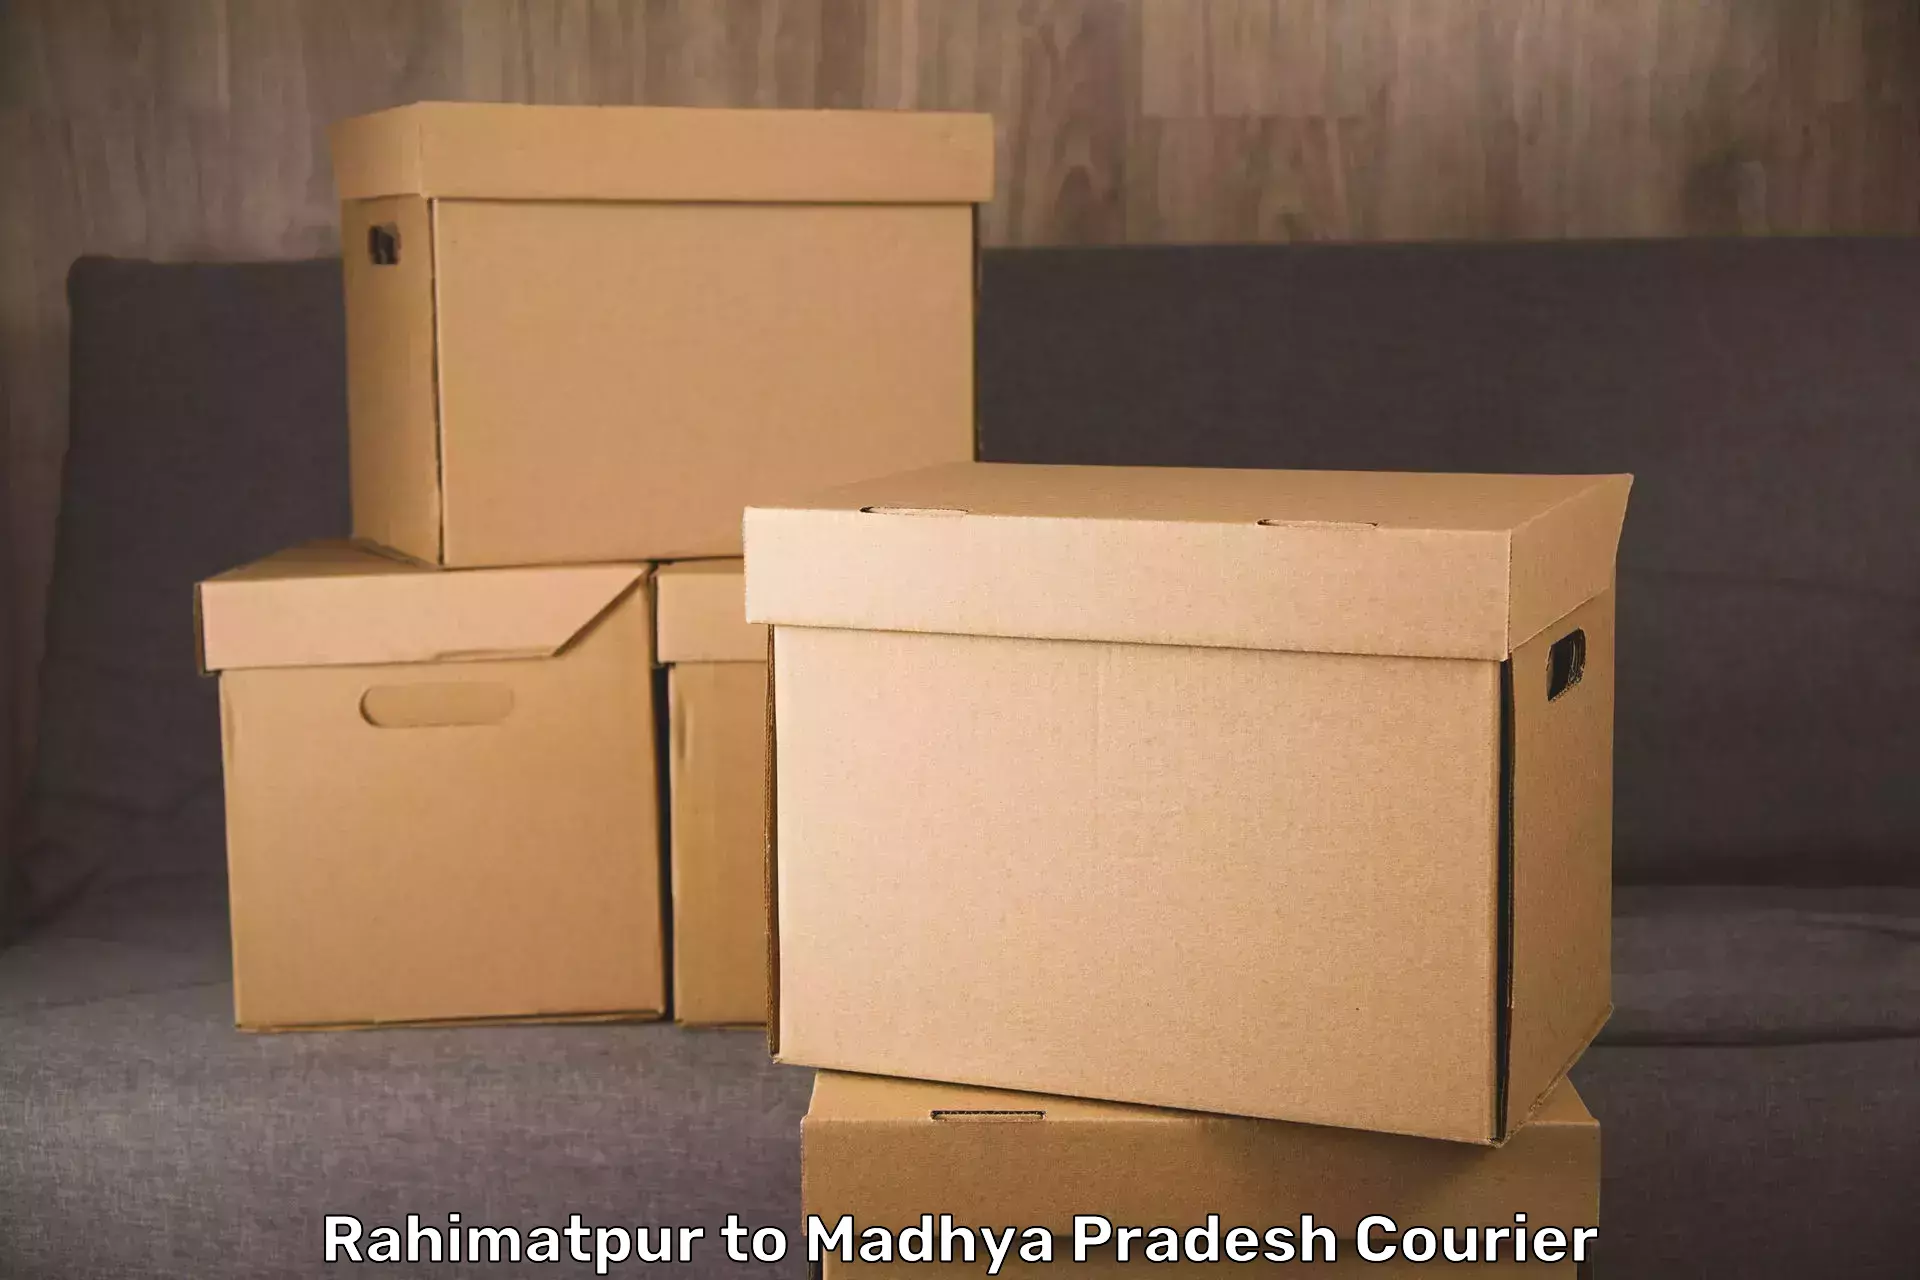 Express luggage delivery in Rahimatpur to Gwalior